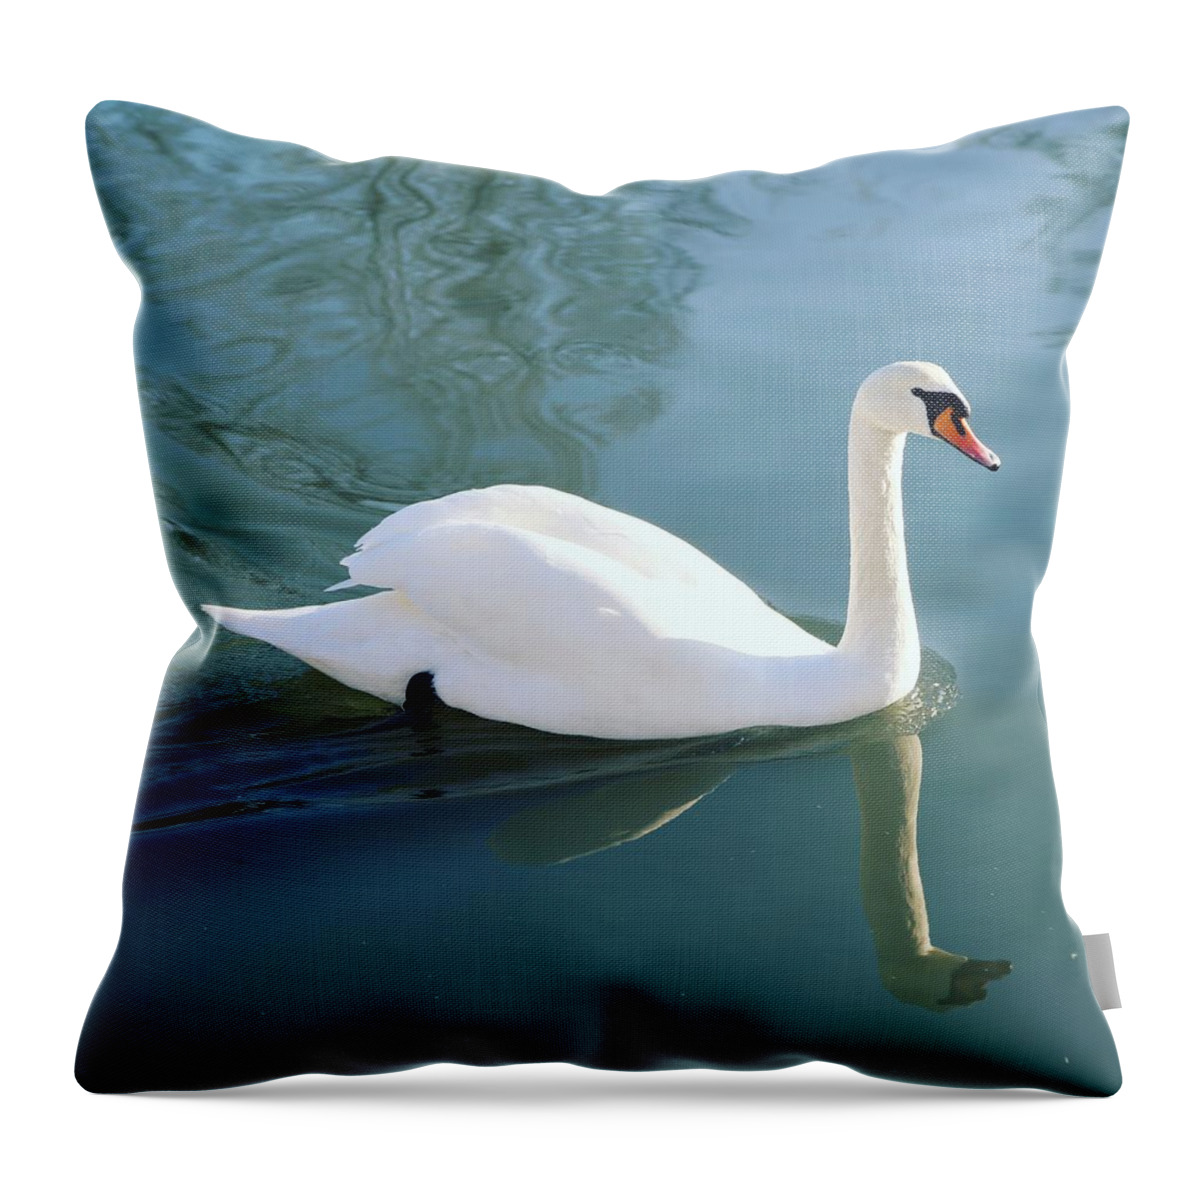 Bird Swan Wildlife Waterfront Water Reflection Outdoors Nature Landscape Norway Scandinavia Europe Outdoors Throw Pillow featuring the digital art The Reflection of a Swan by Jeanette Rode Dybdahl